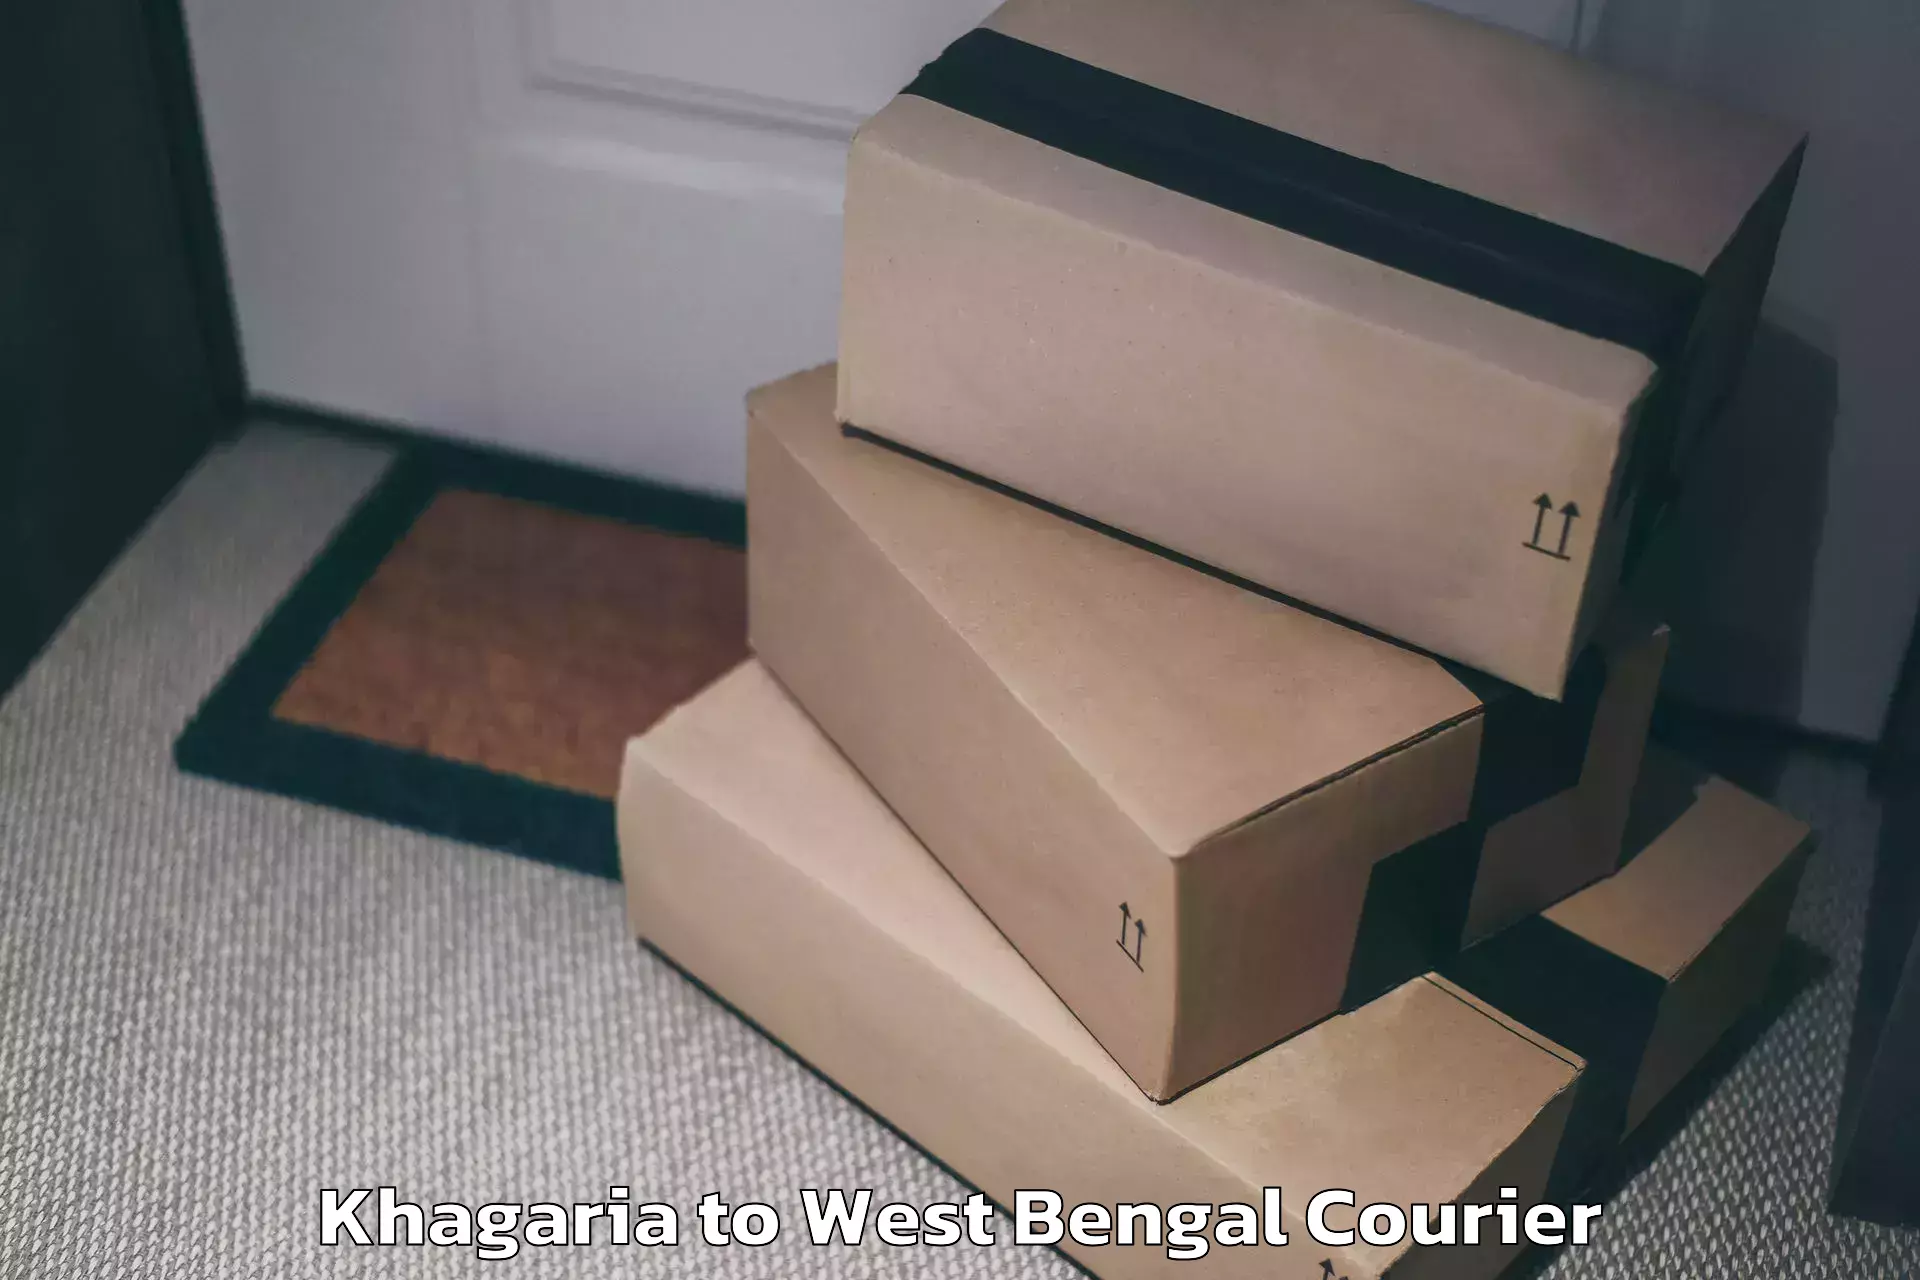 Baggage relocation service Khagaria to West Bengal